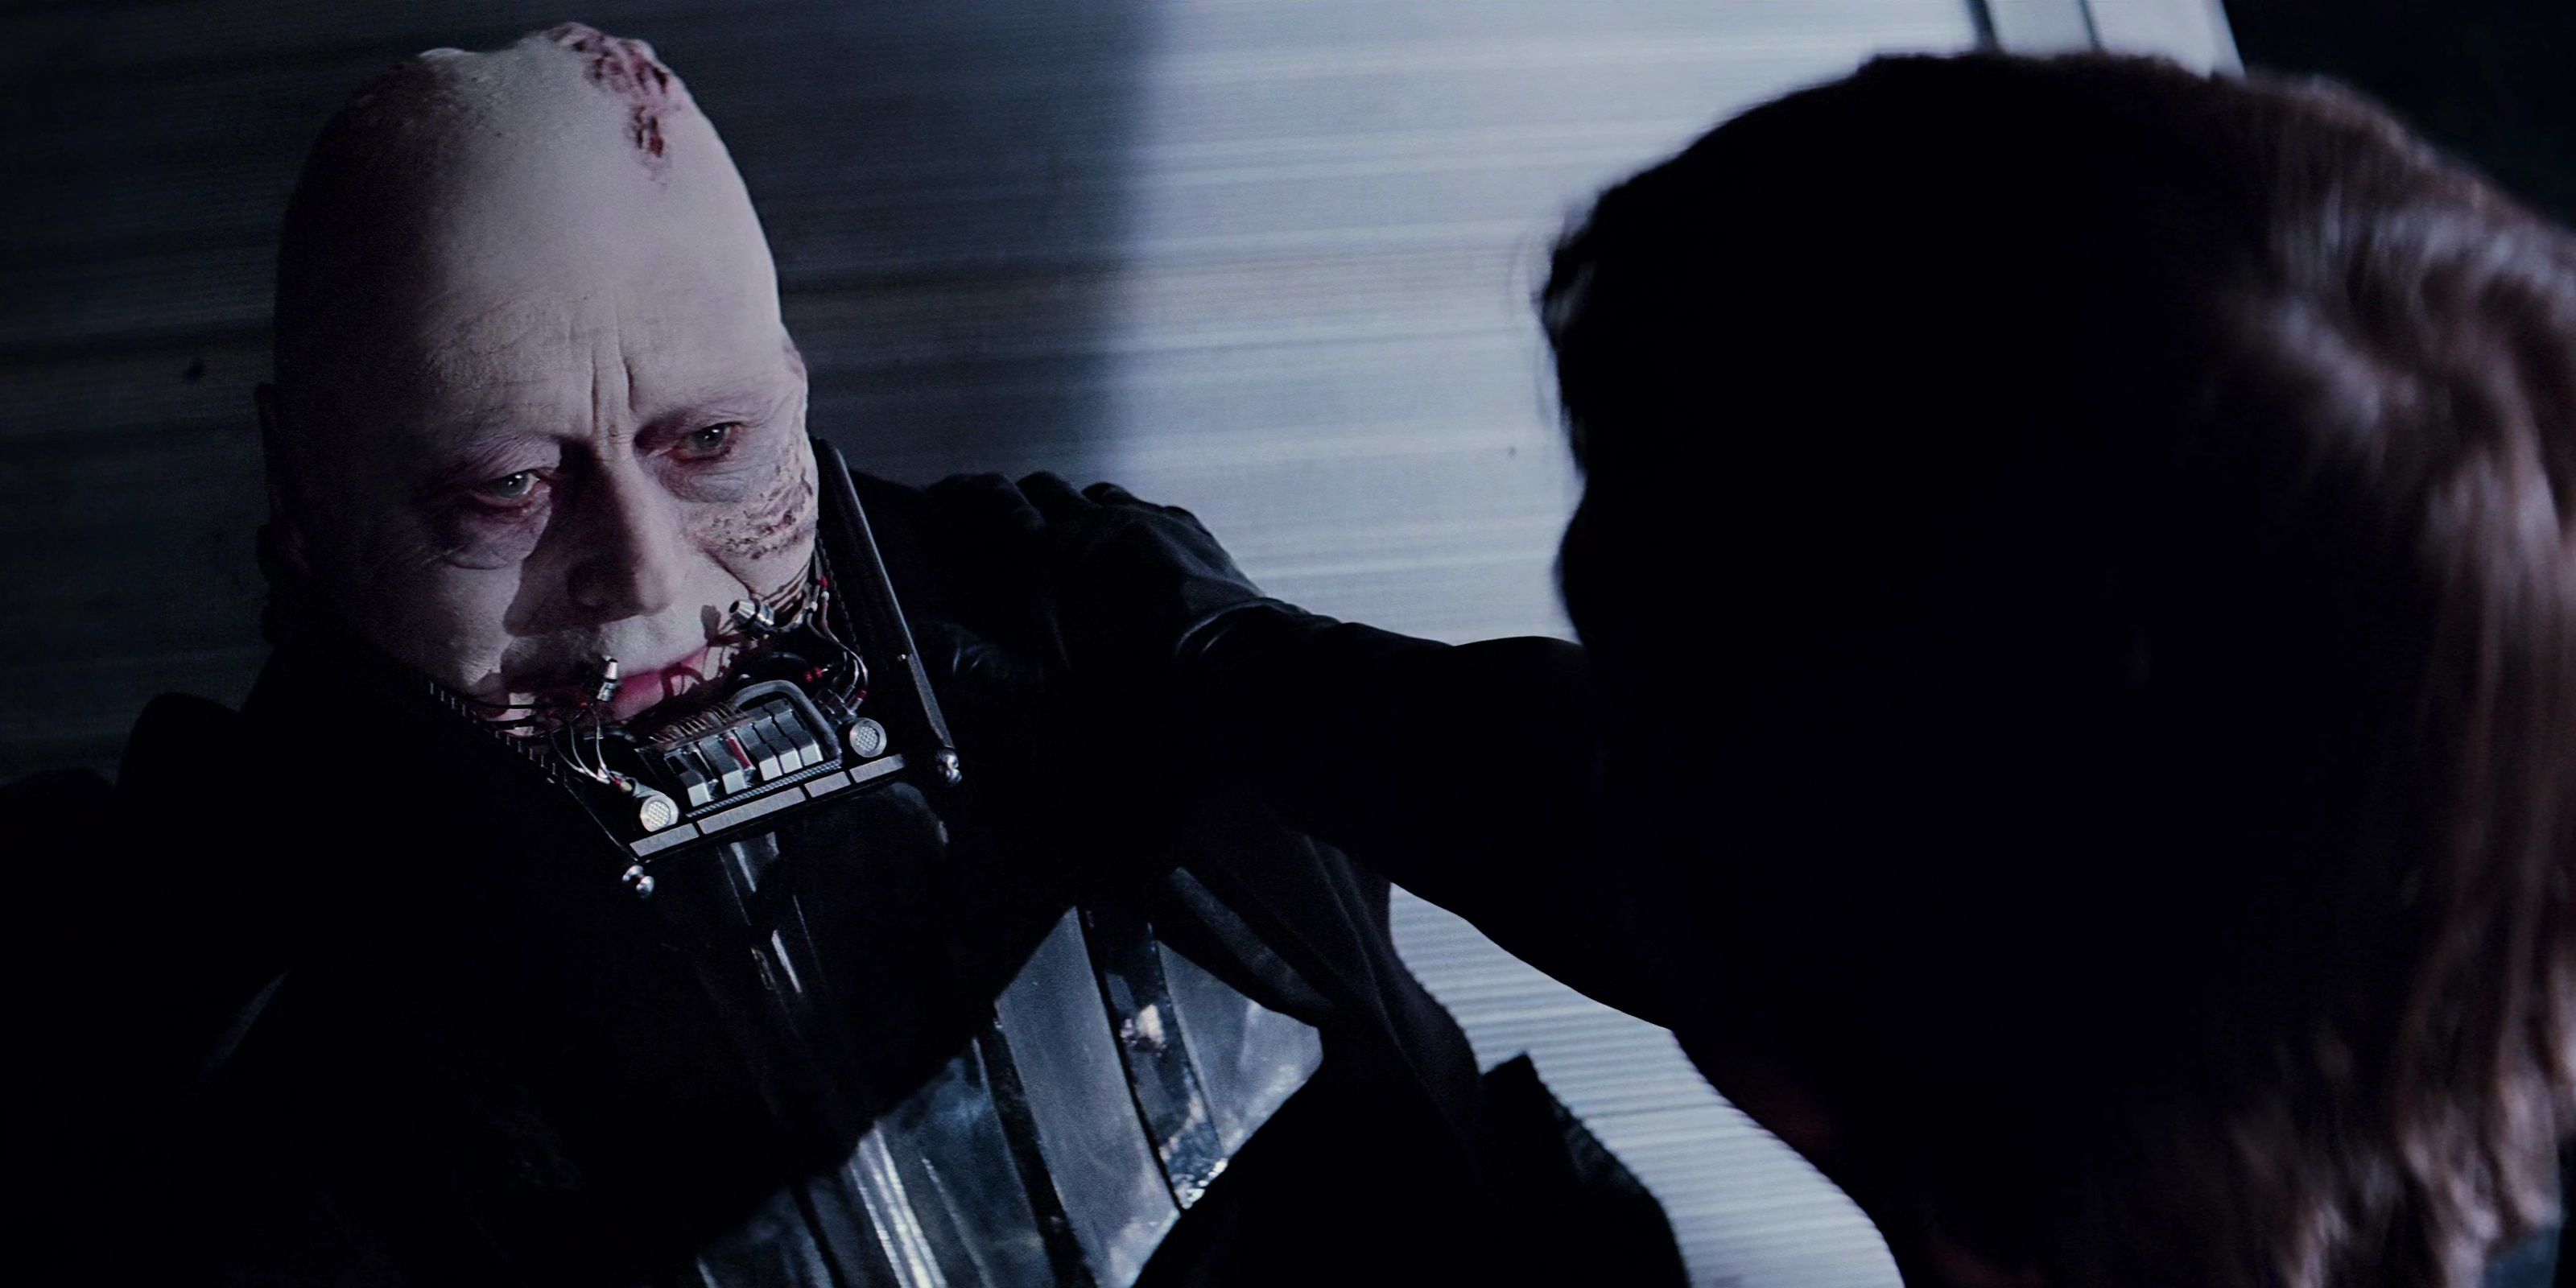 Sebastian Shaw as the unmasked Darth Vader in Return of the Jedi